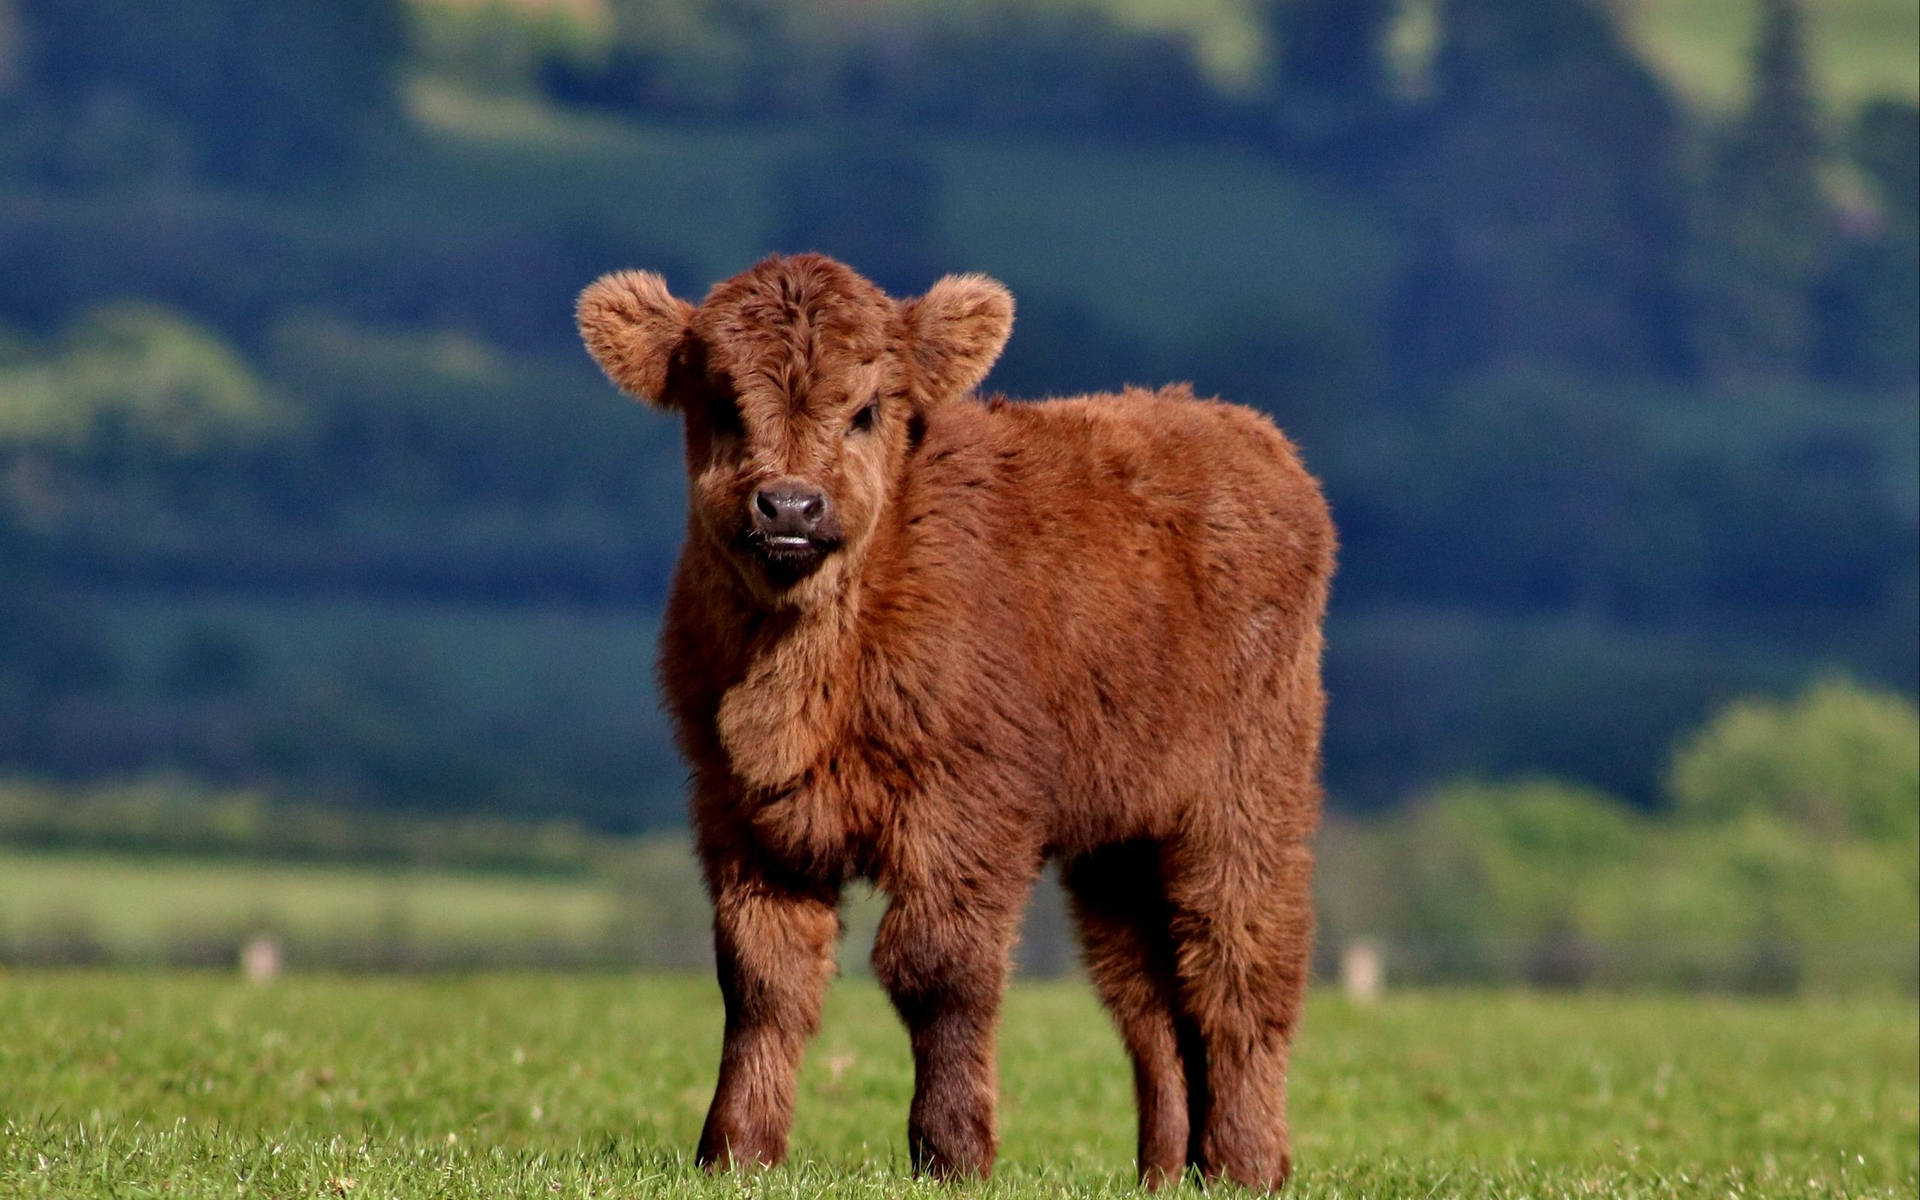 A gentle and Fluffy Brown Cow grazing in a pasture. Wallpaper